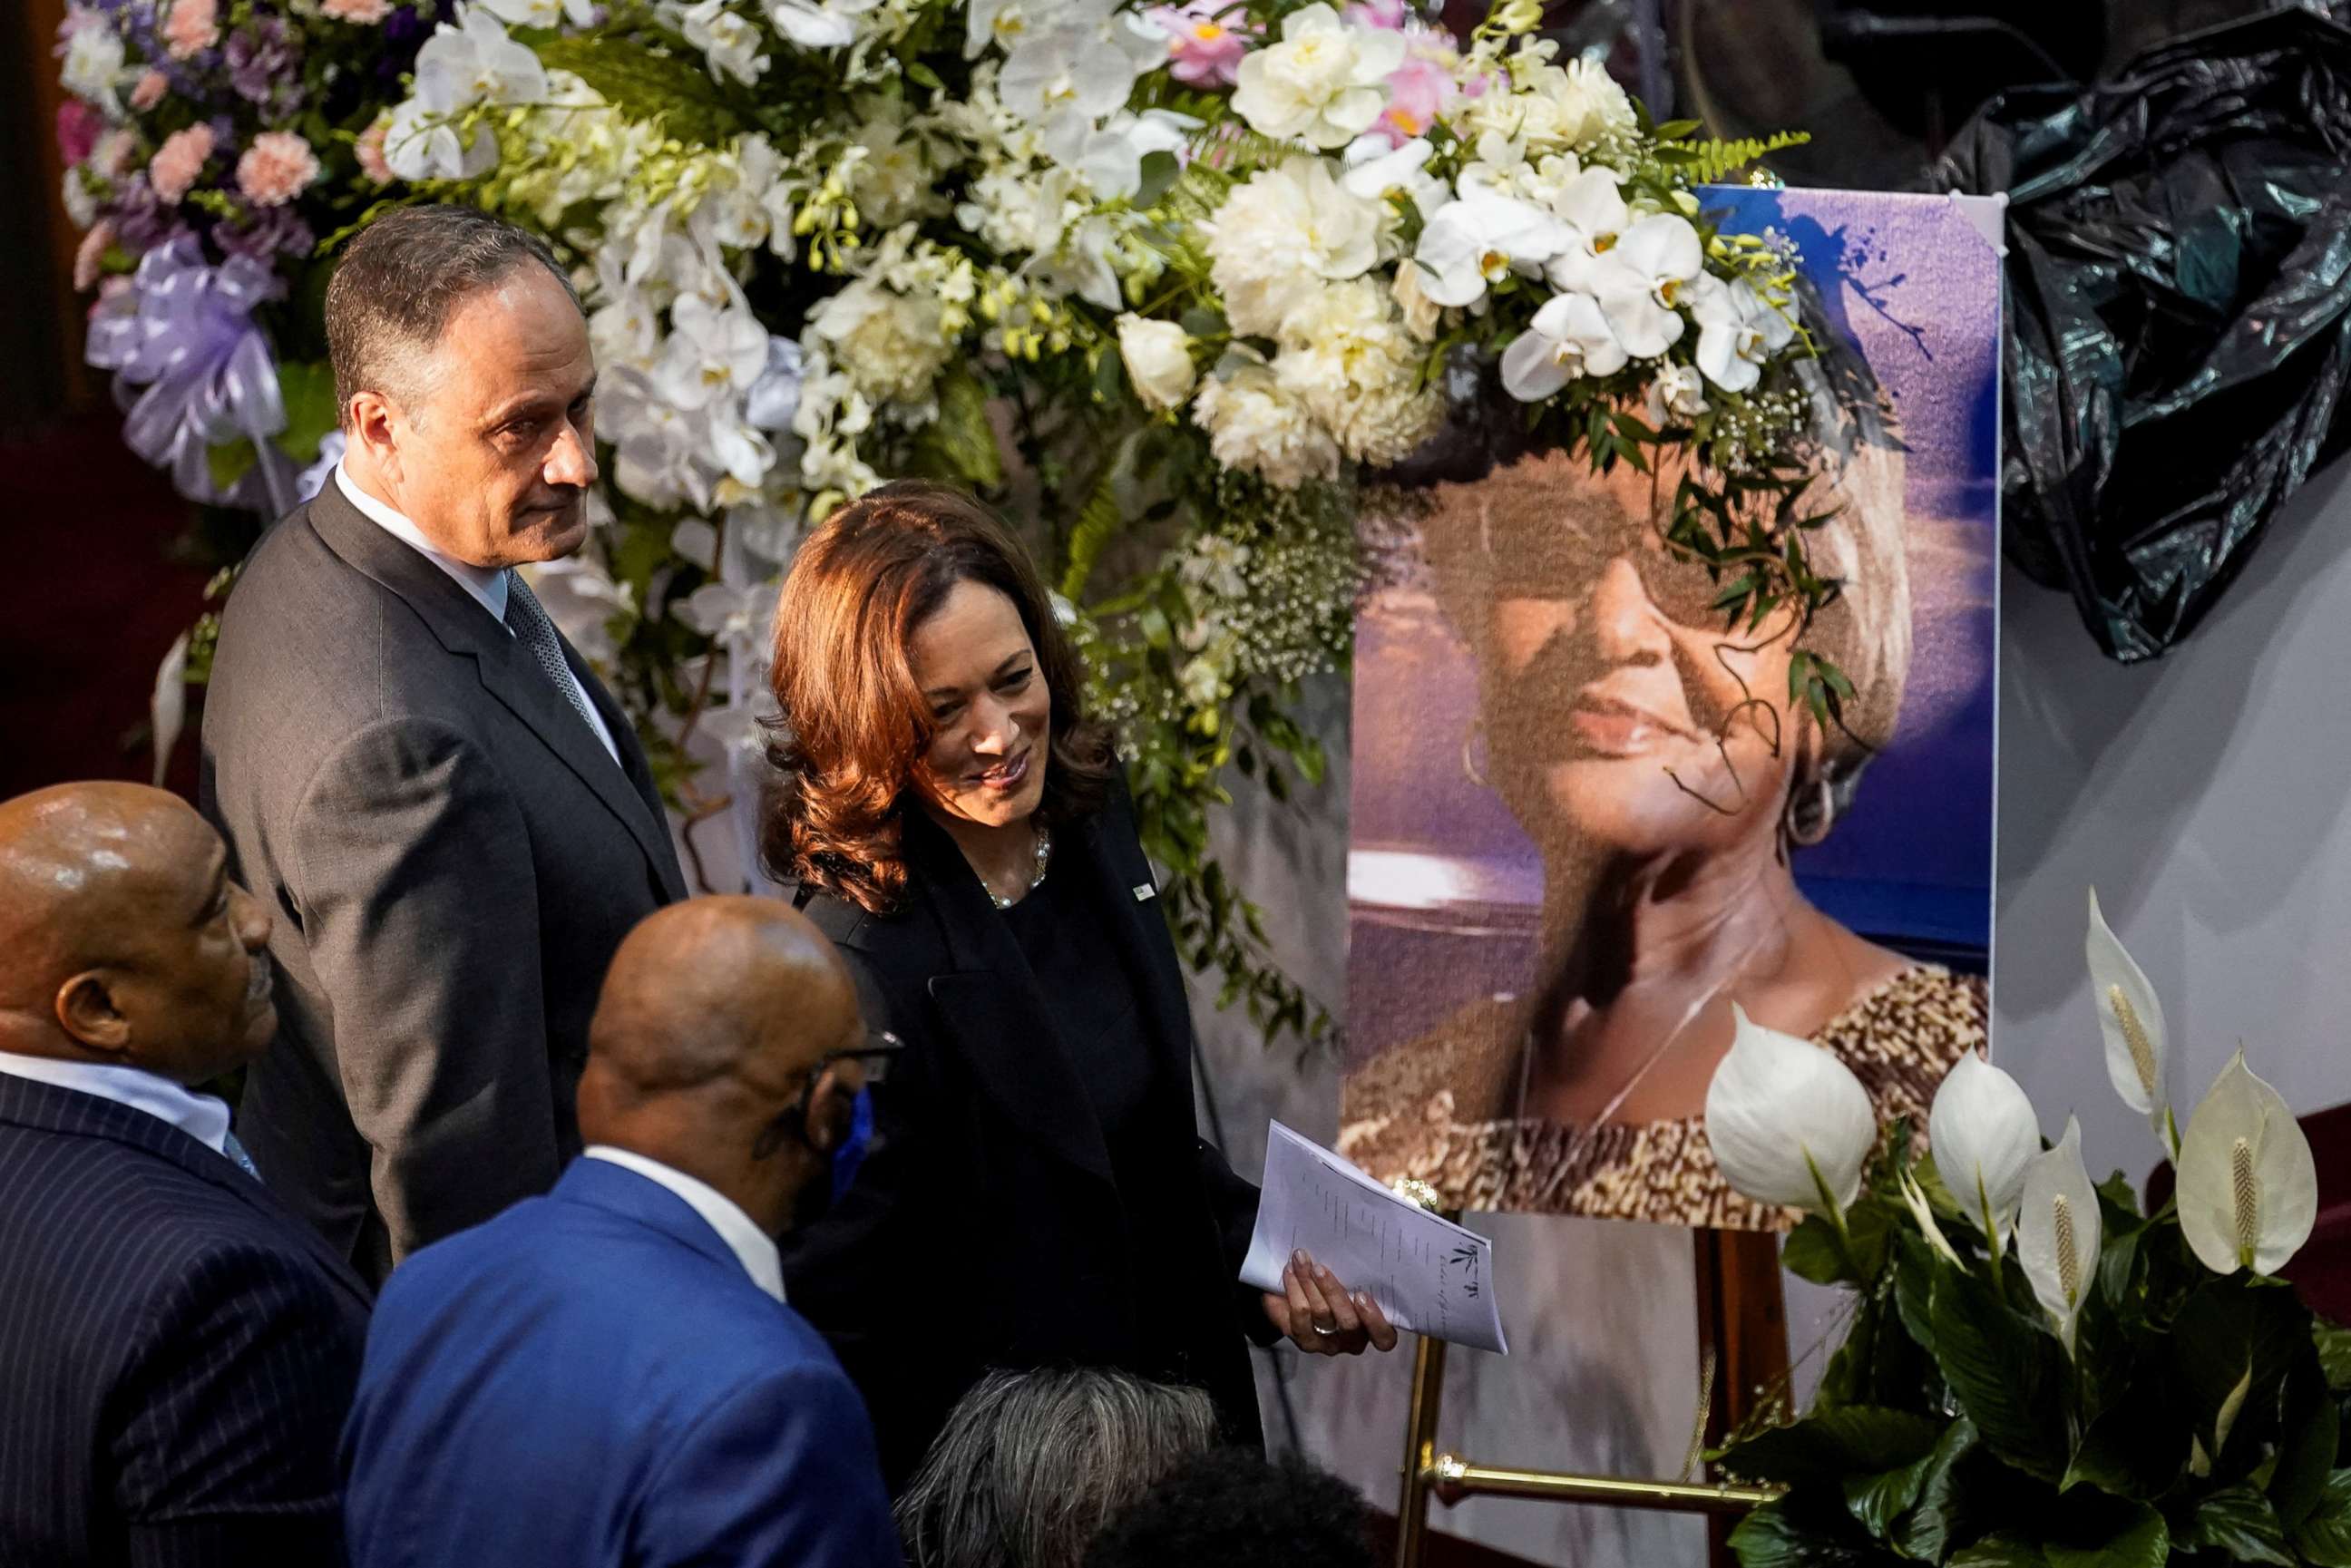 PHOTO: Vice President Kamala Harris and first gentleman Douglas Emhoff arrive for the funeral service for Ruth Whitfield, an 86-year-old victim of the recent mass shooting in Buffalo, at Mount Olive Baptist Church in Buffalo, New York, May 28, 2022.